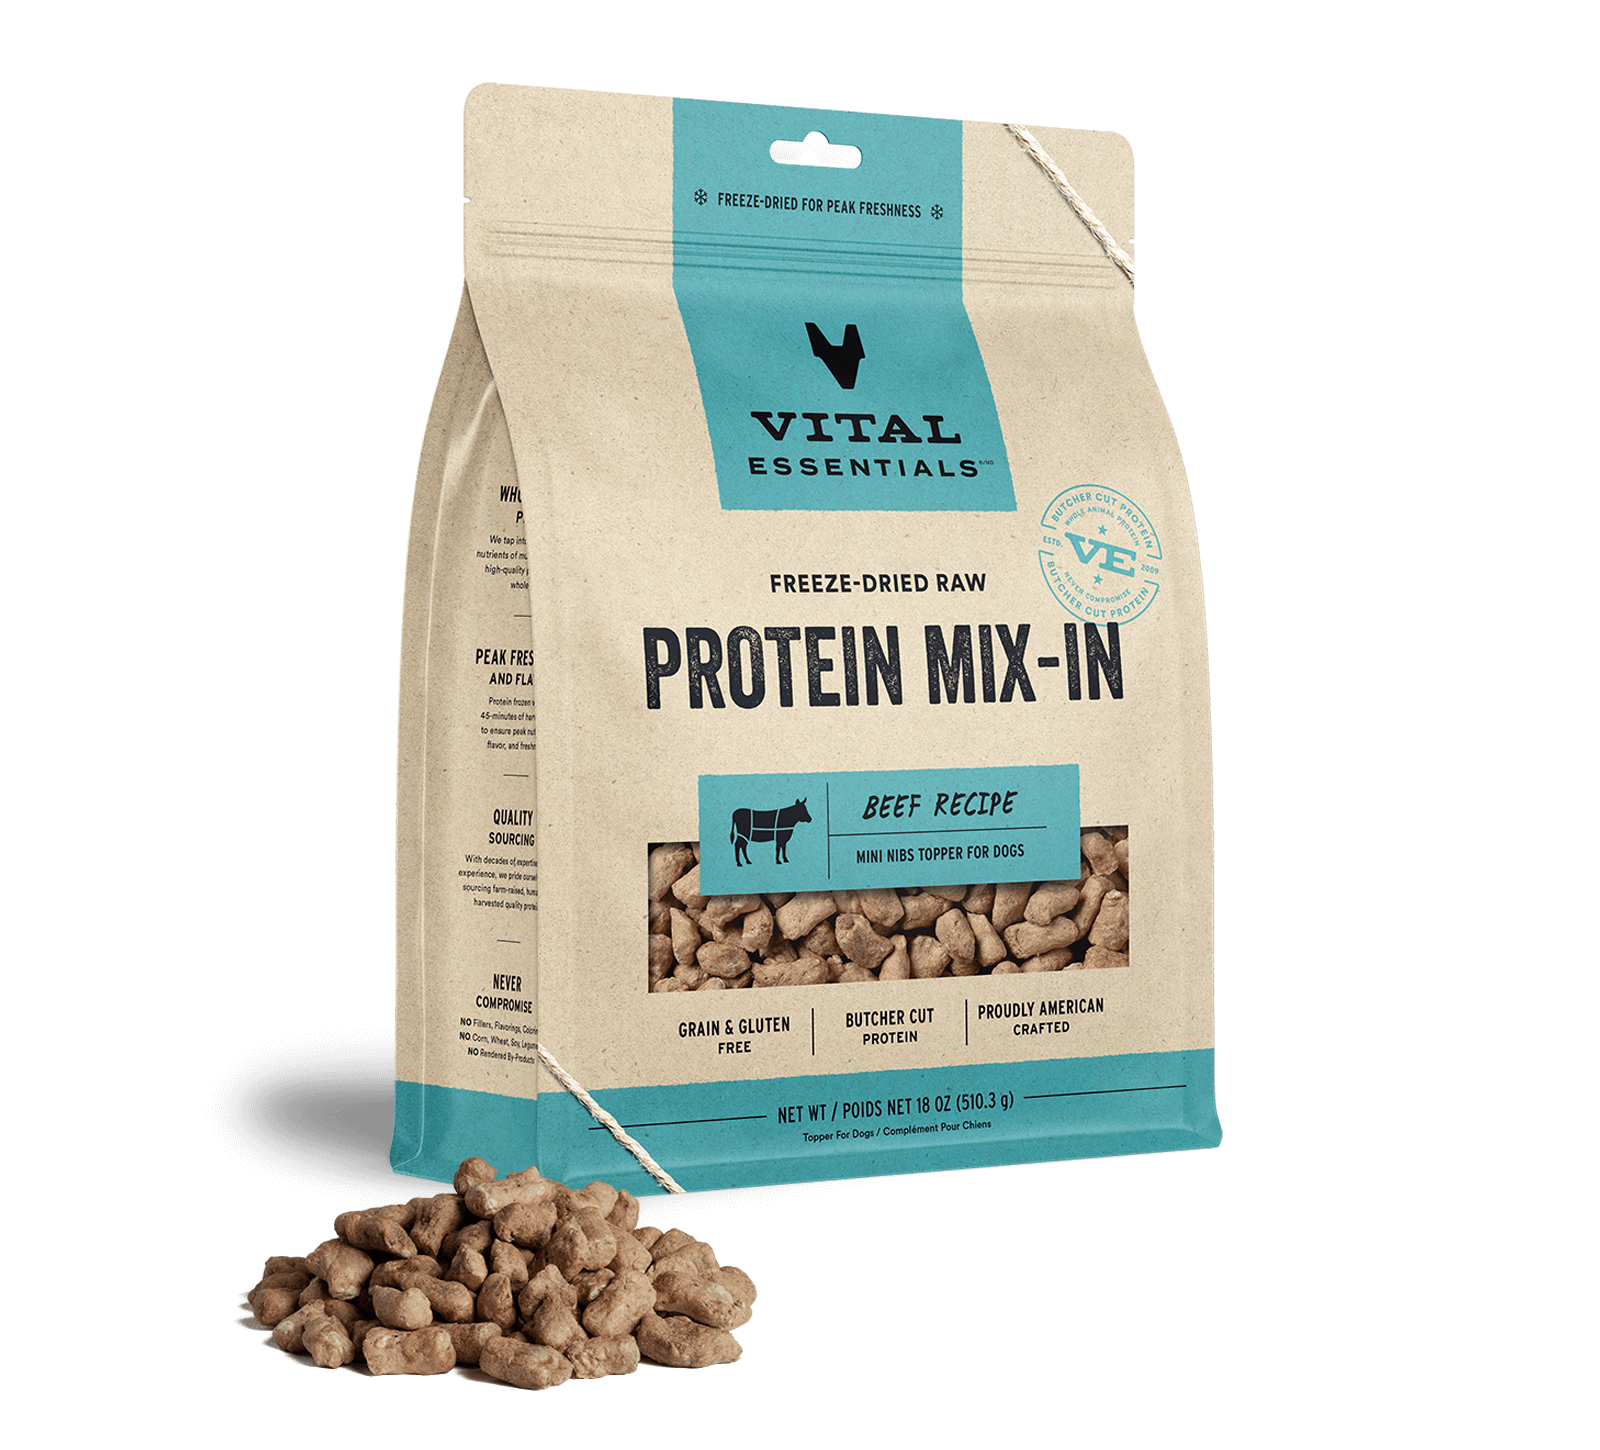 Vital Essentials Freeze-Dried Raw Protein Mix-In Beef Recipe Mini Nibs Topper for Dogs, 18 oz - Health/First Aid